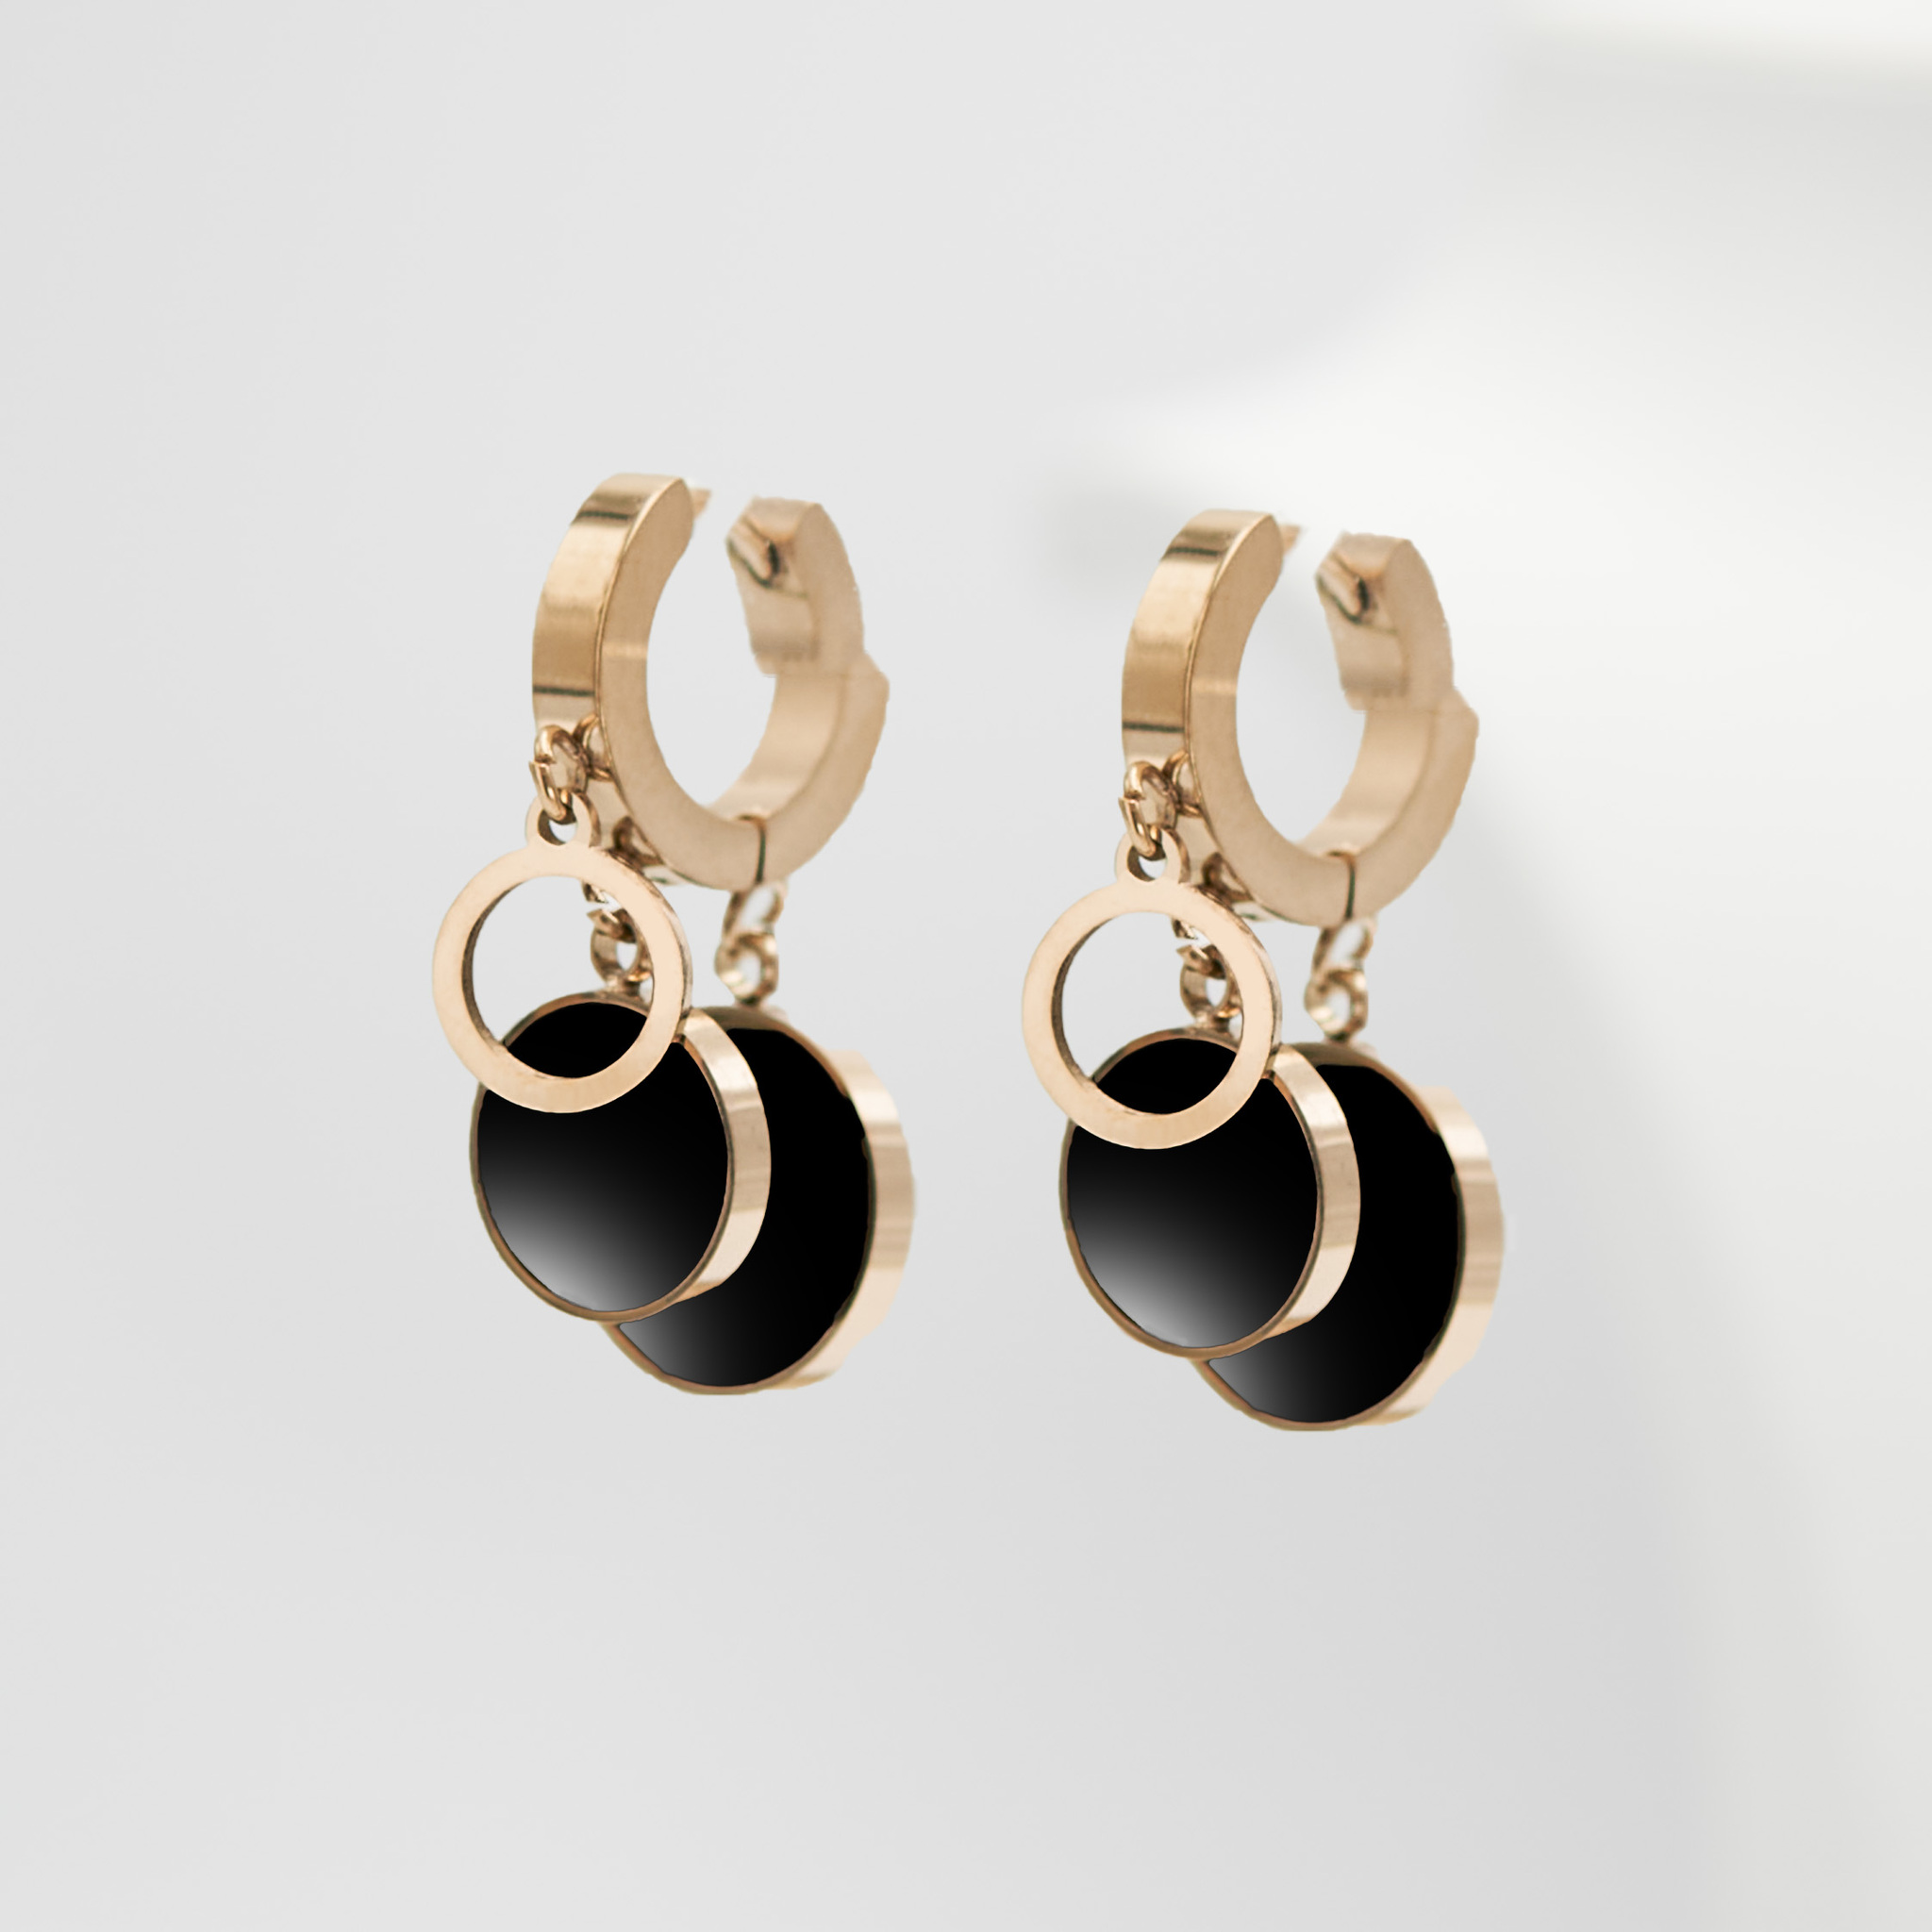 1- Eclipse Beauty Rose Gold Edition -Örhänge 316 L - Special Earrings From SWEVALI